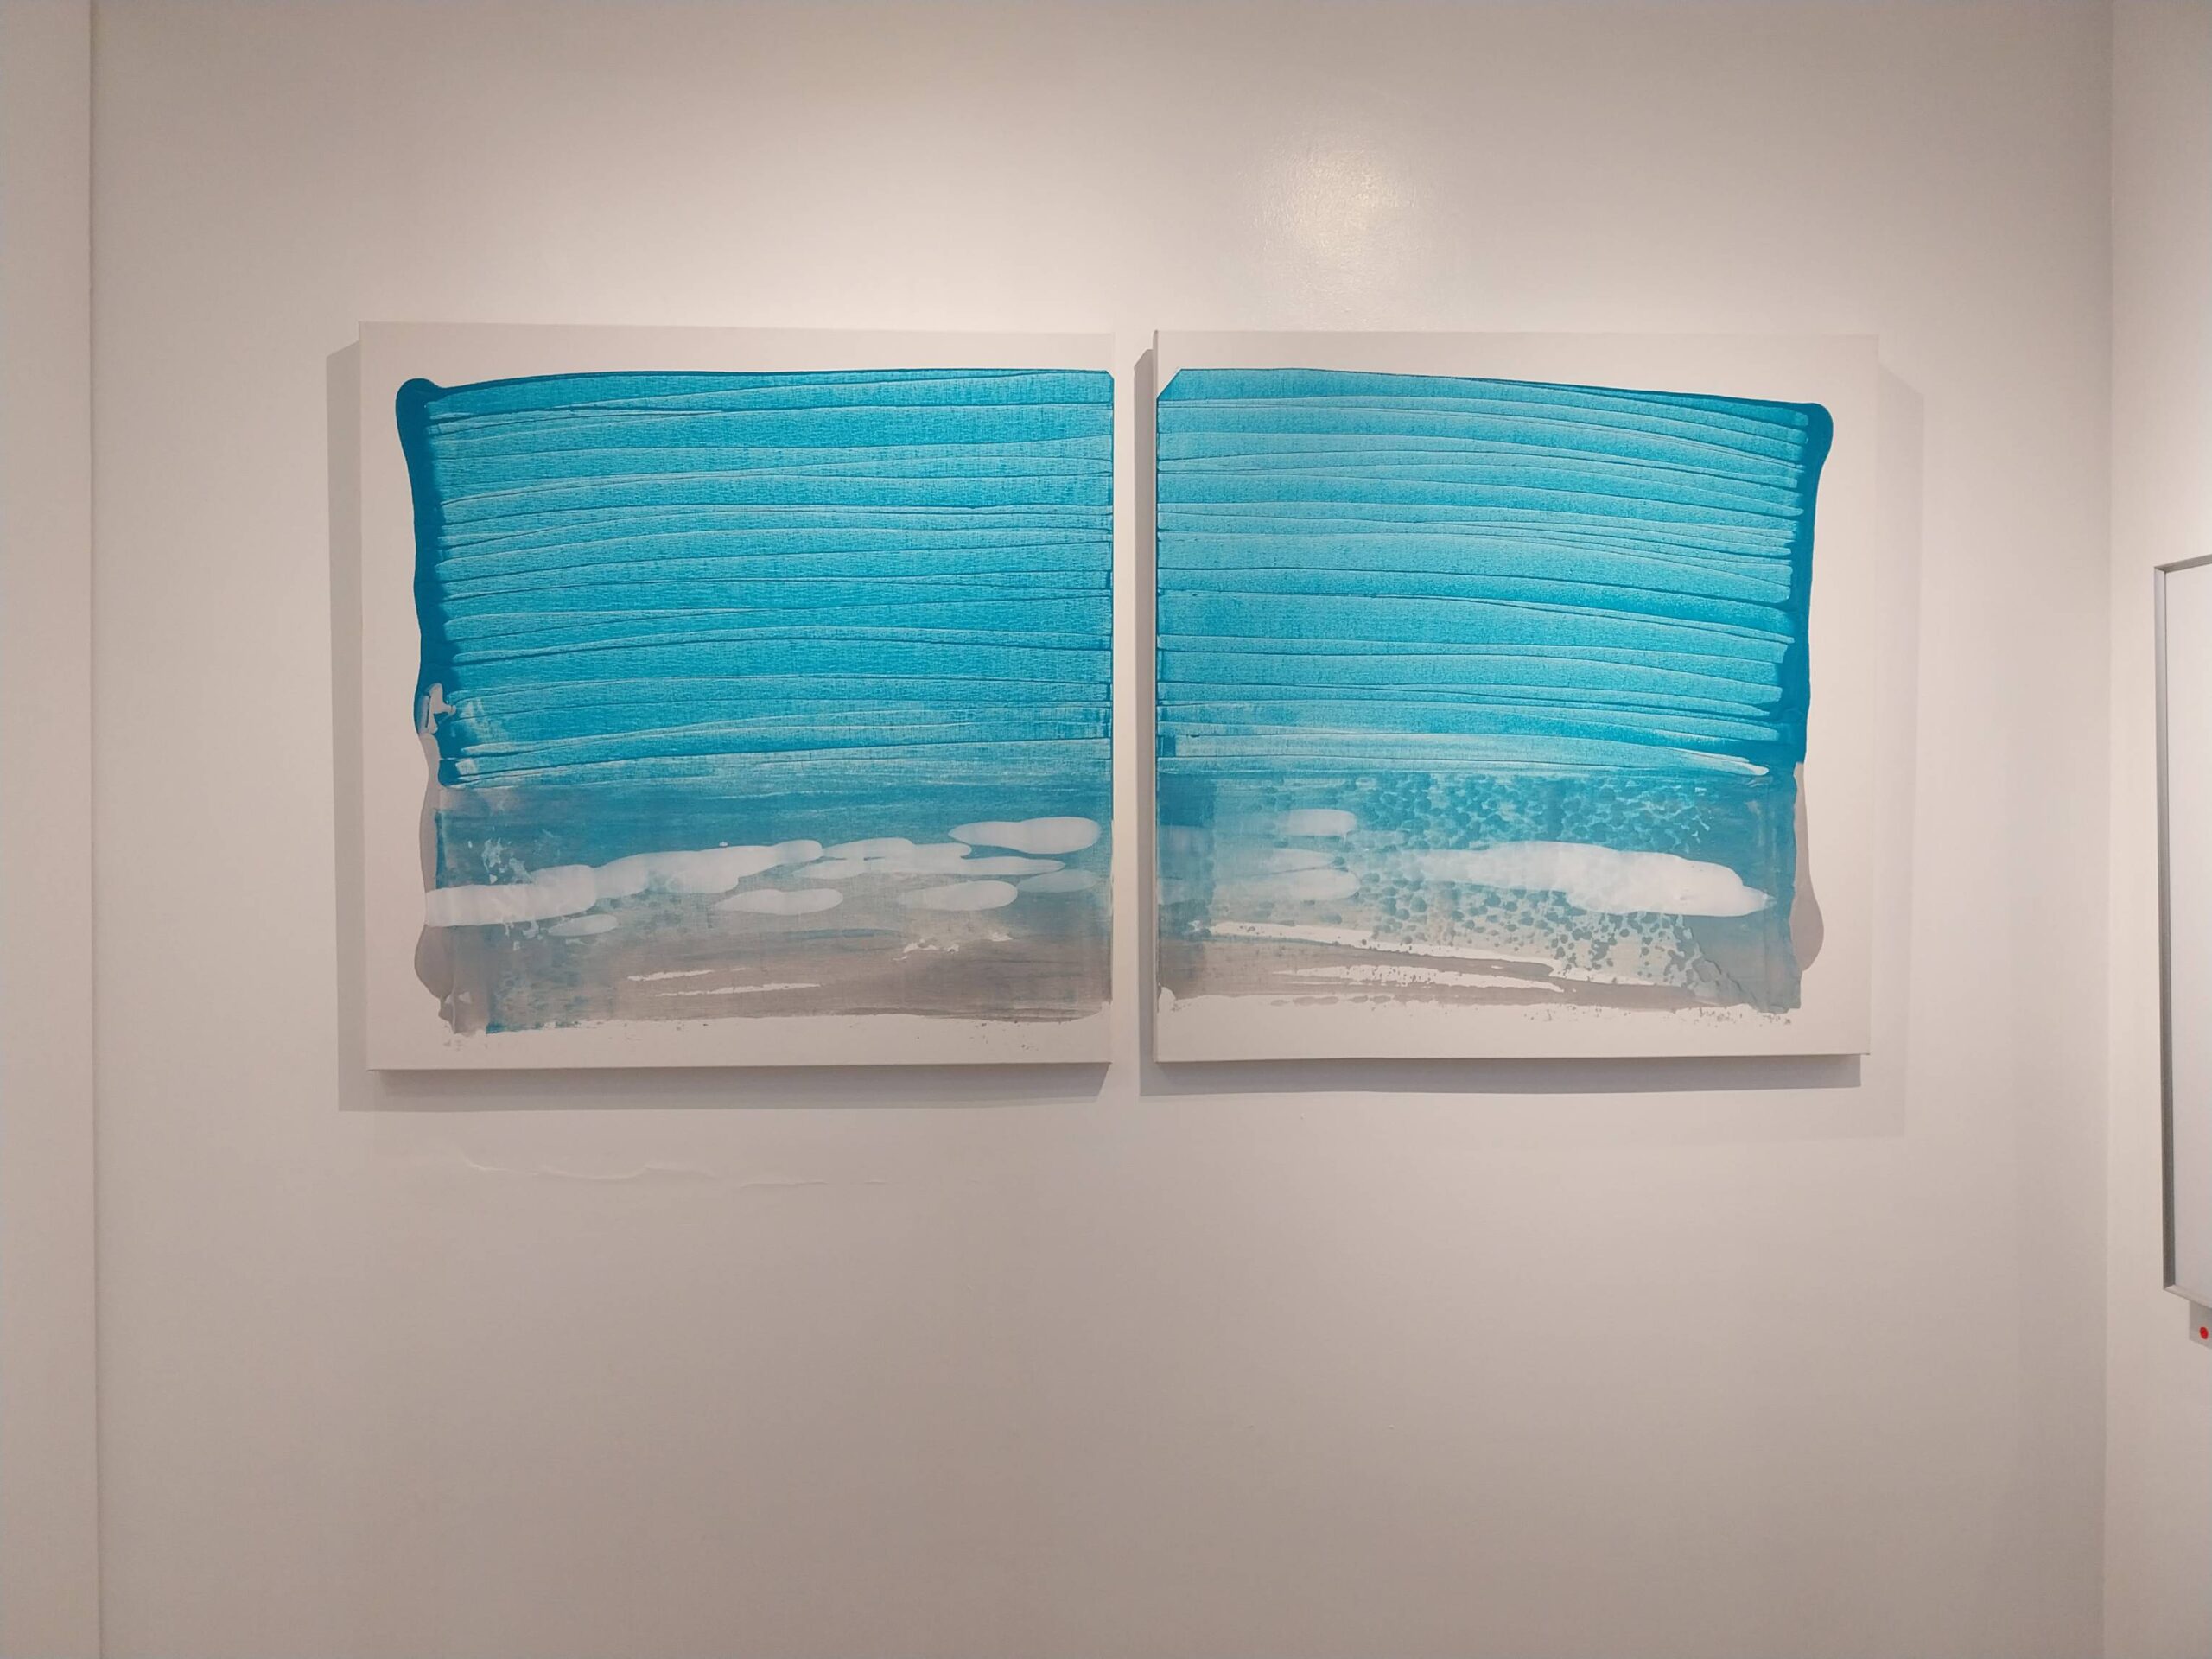 The diptych in the midst of Janice Liuson-Young's "Clouds Come Floating." Photo by Elle Yap.